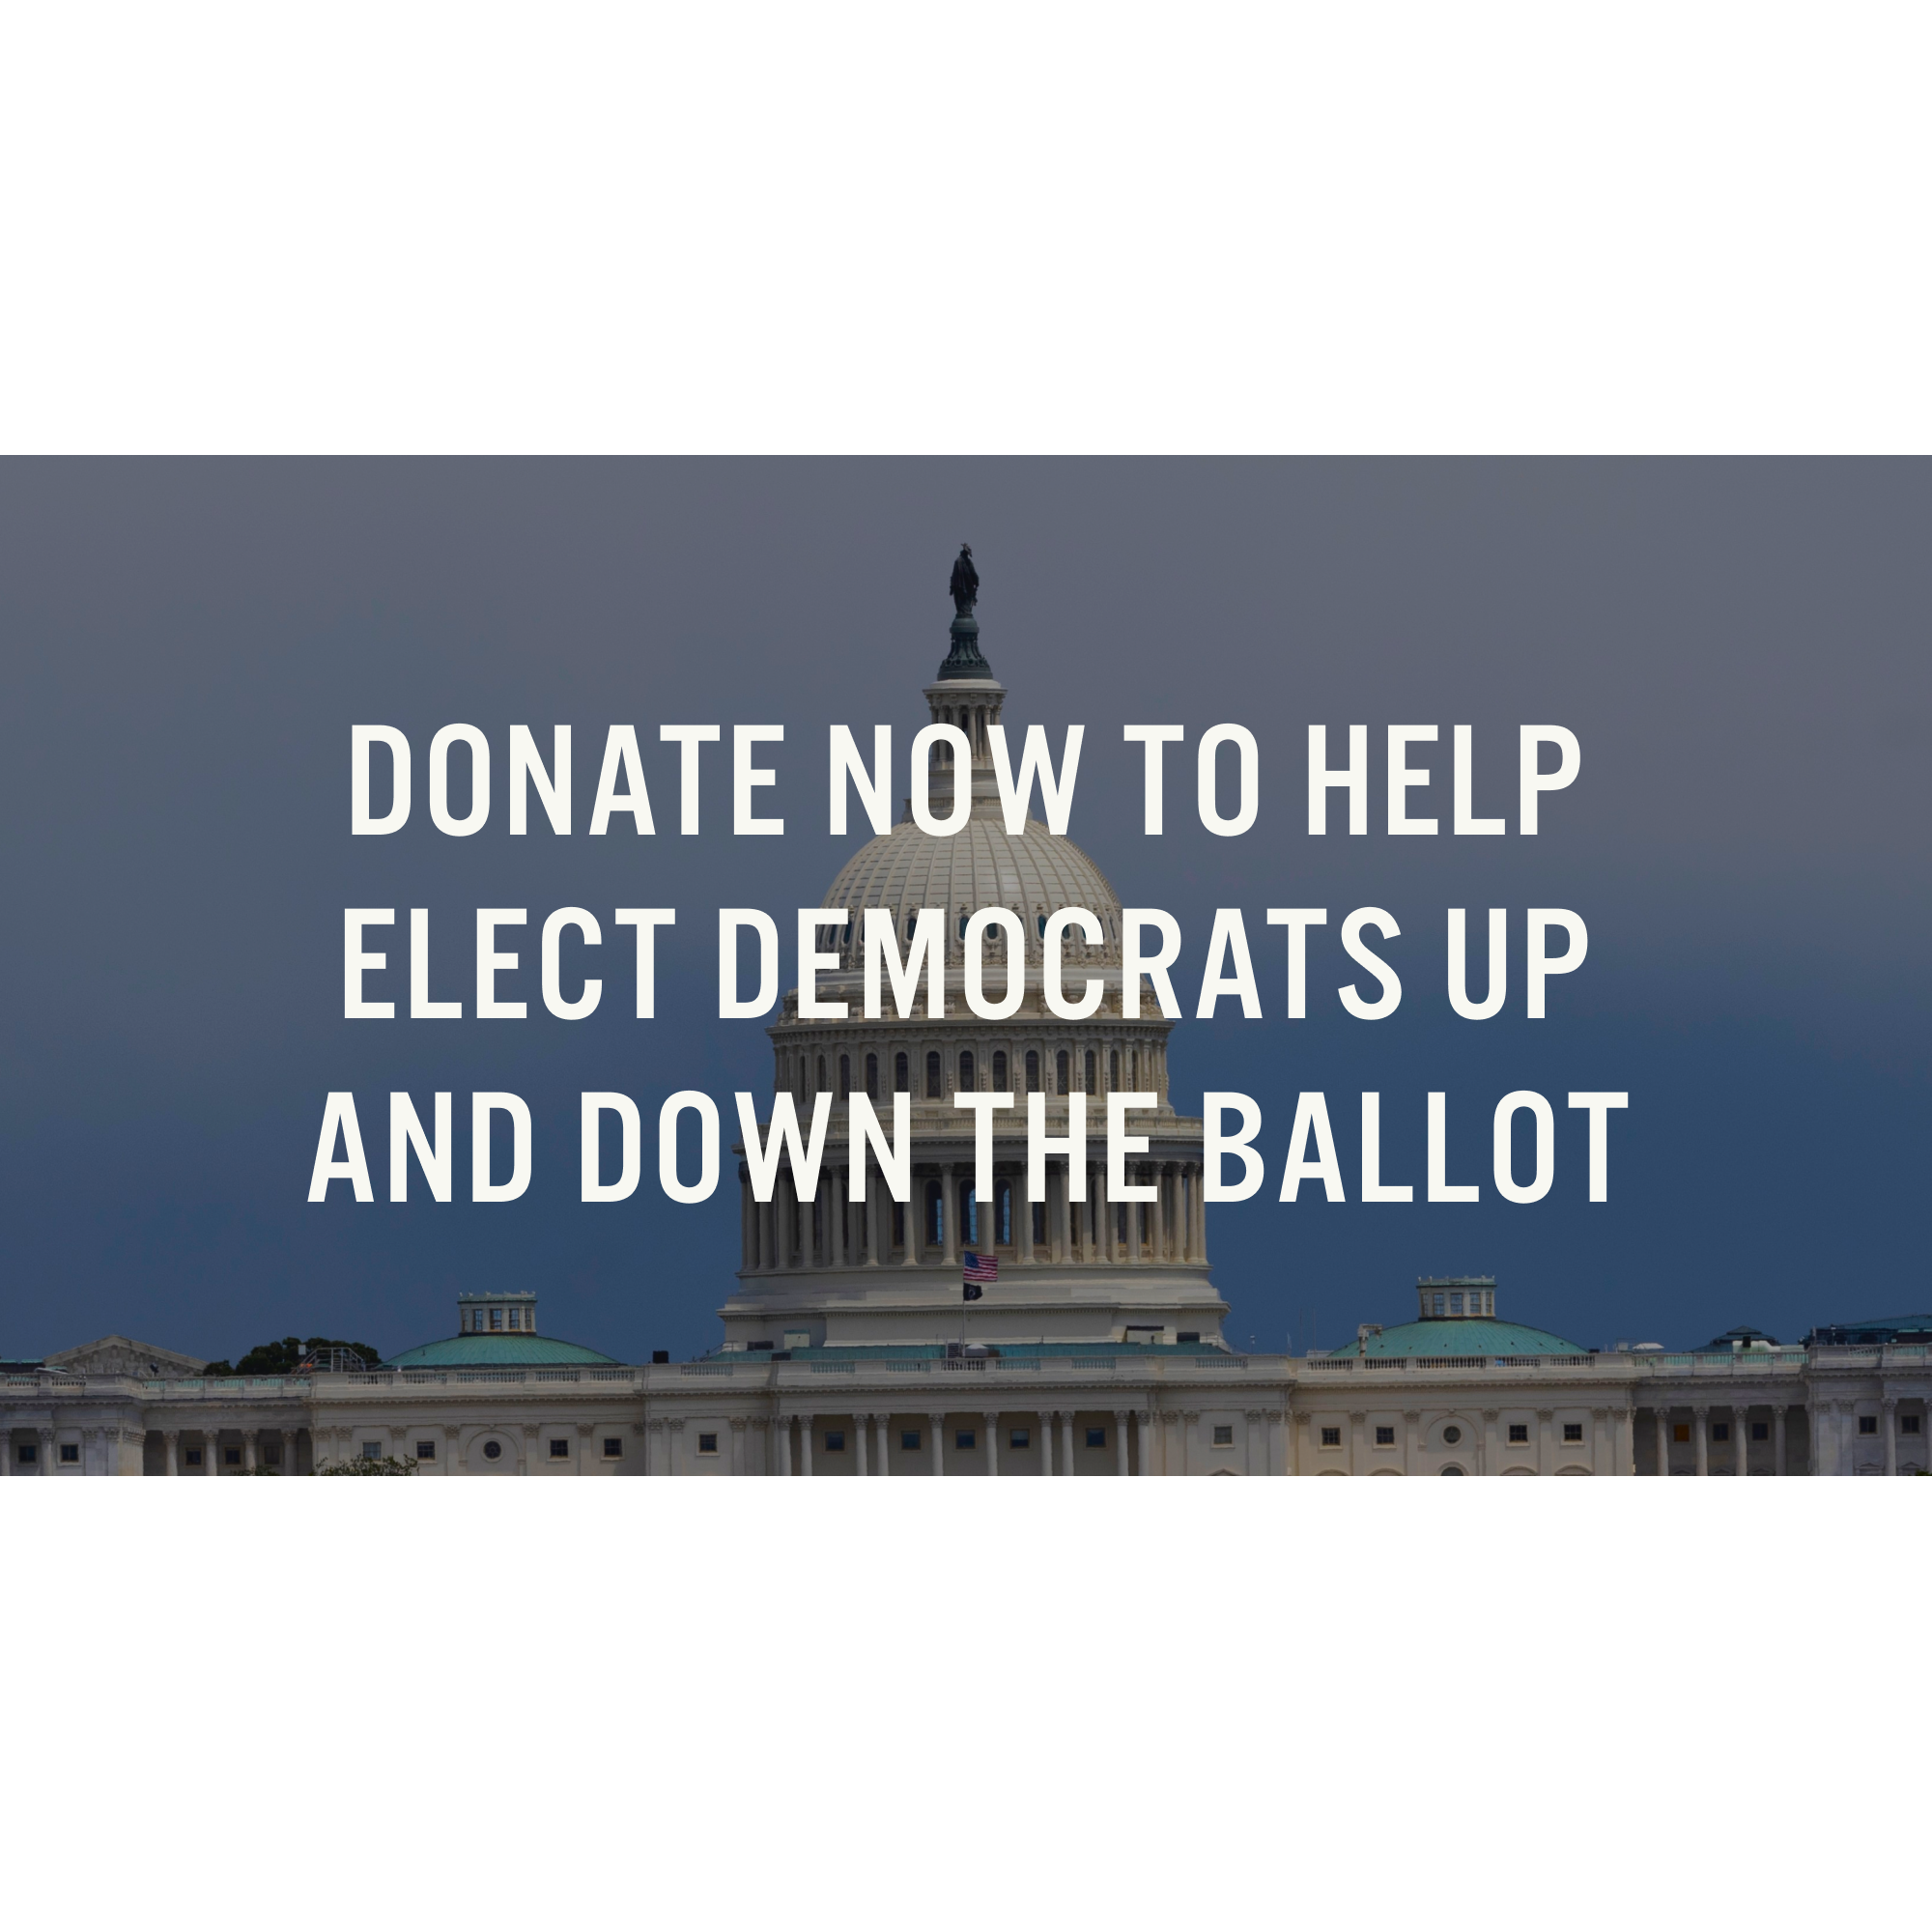 Donate now to help elect Democrats up and down the ballot